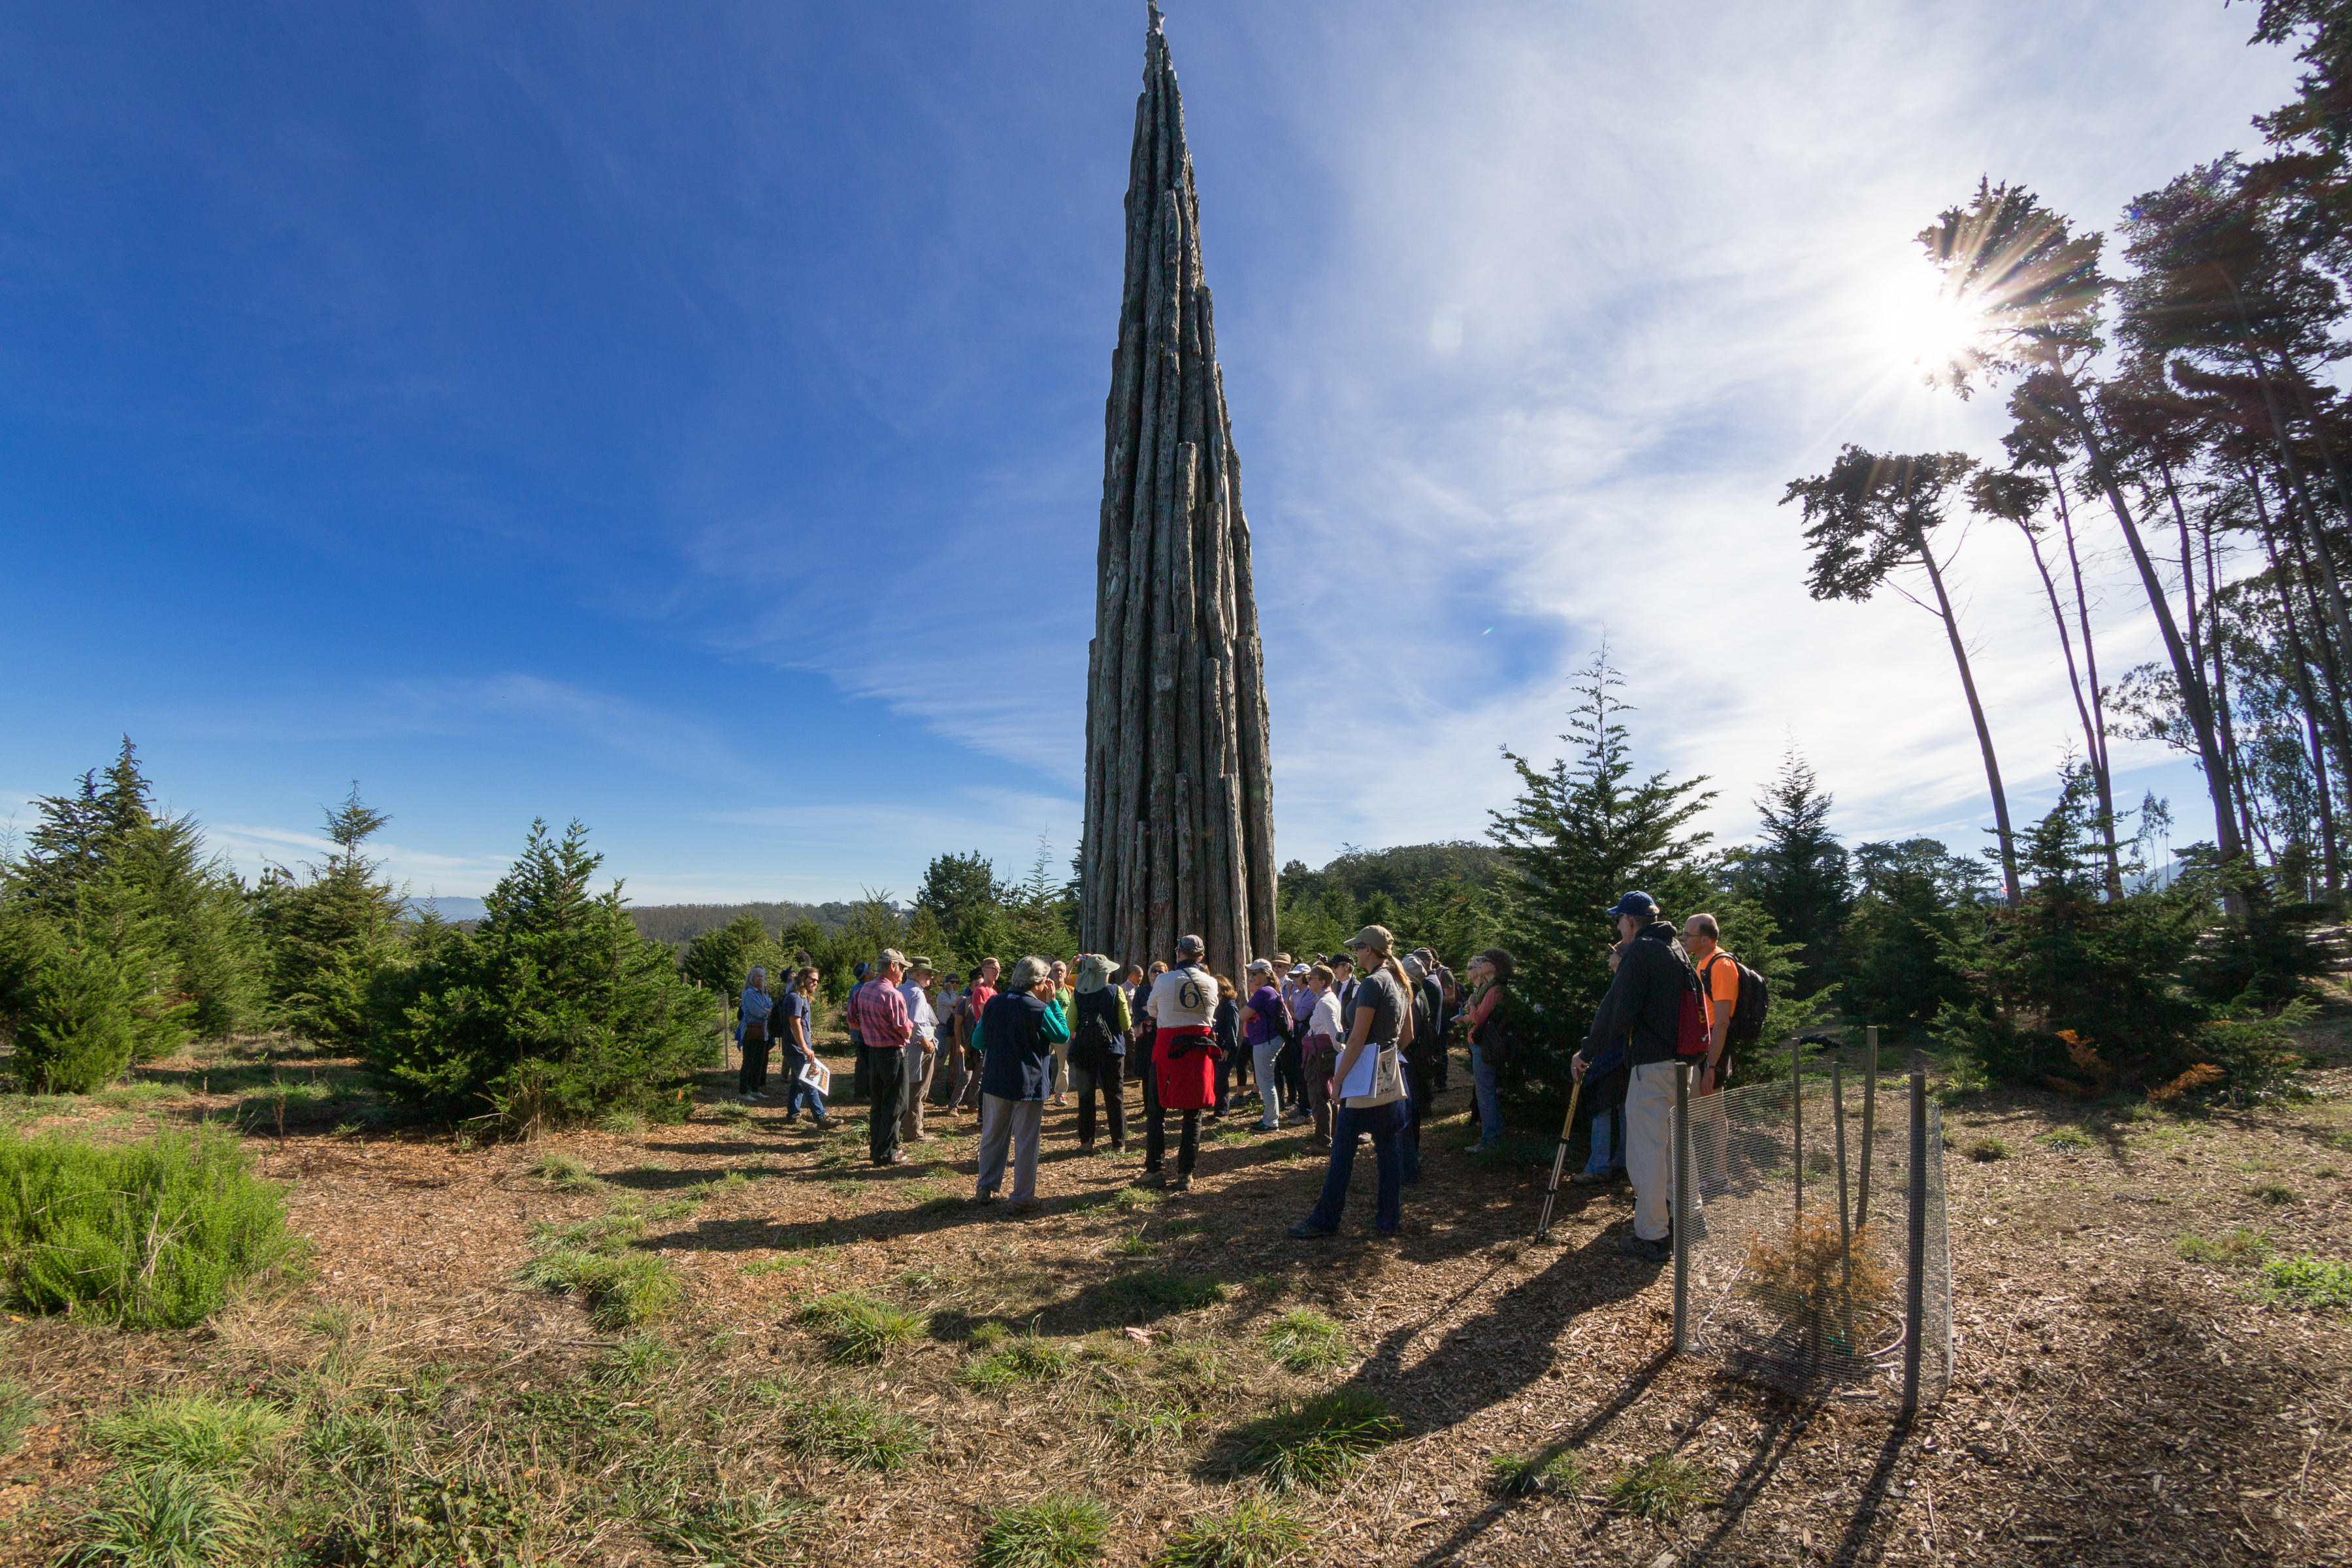 A docent led tour group gathers at Goldsworthy's "Spire" in the Presidio.